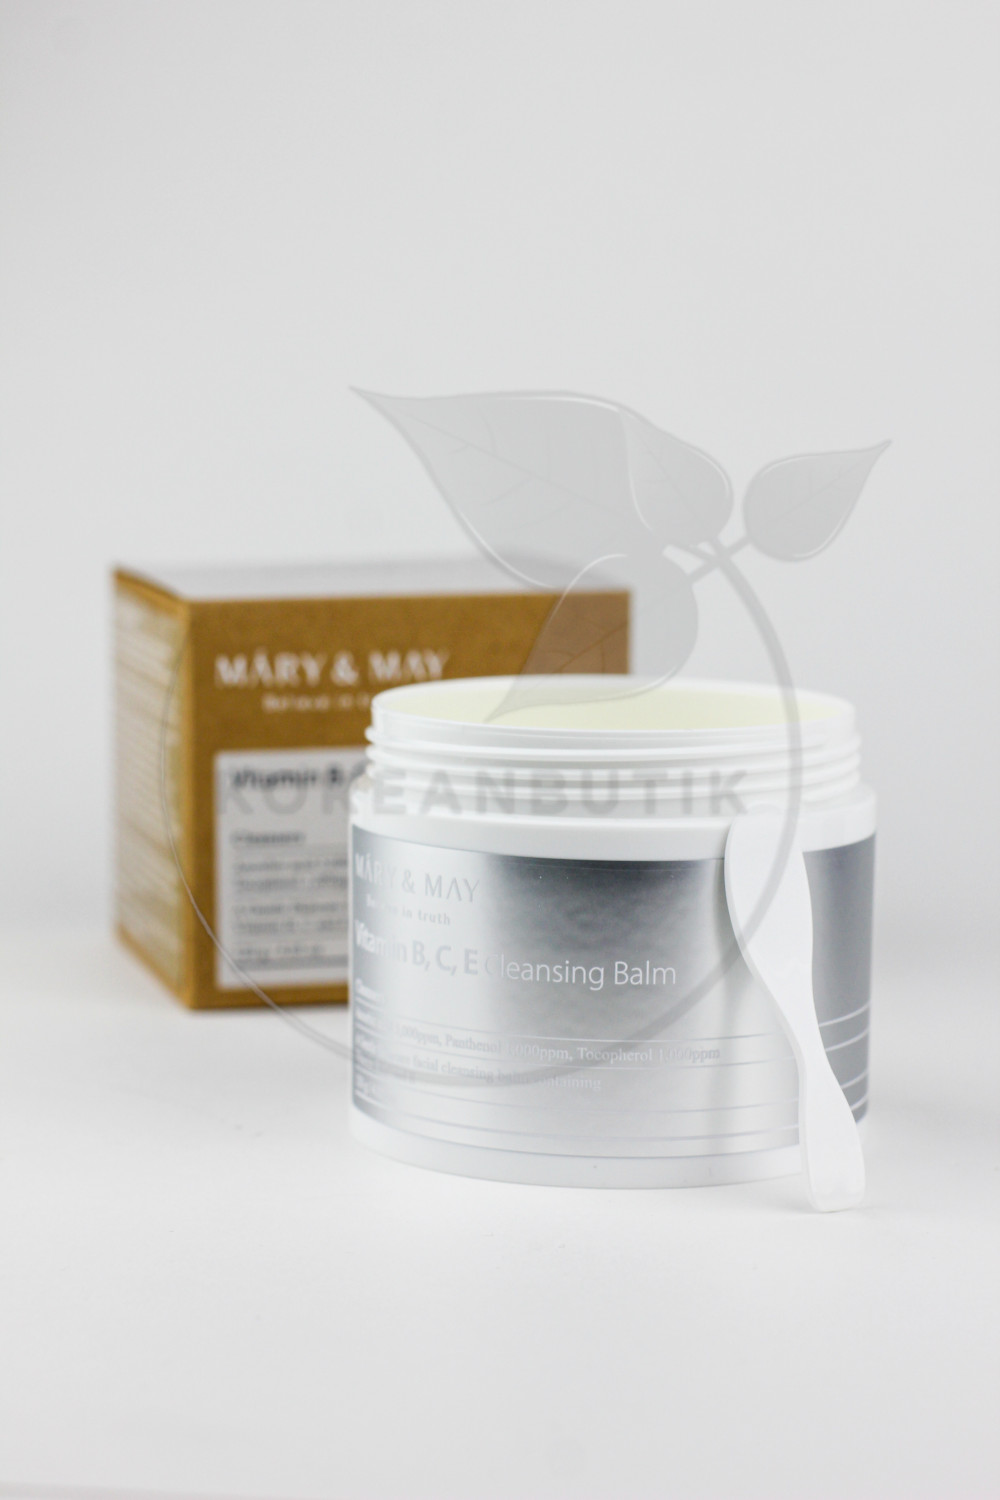  Mary&May Vitamine B.C.E Cleansing Balm 120g 